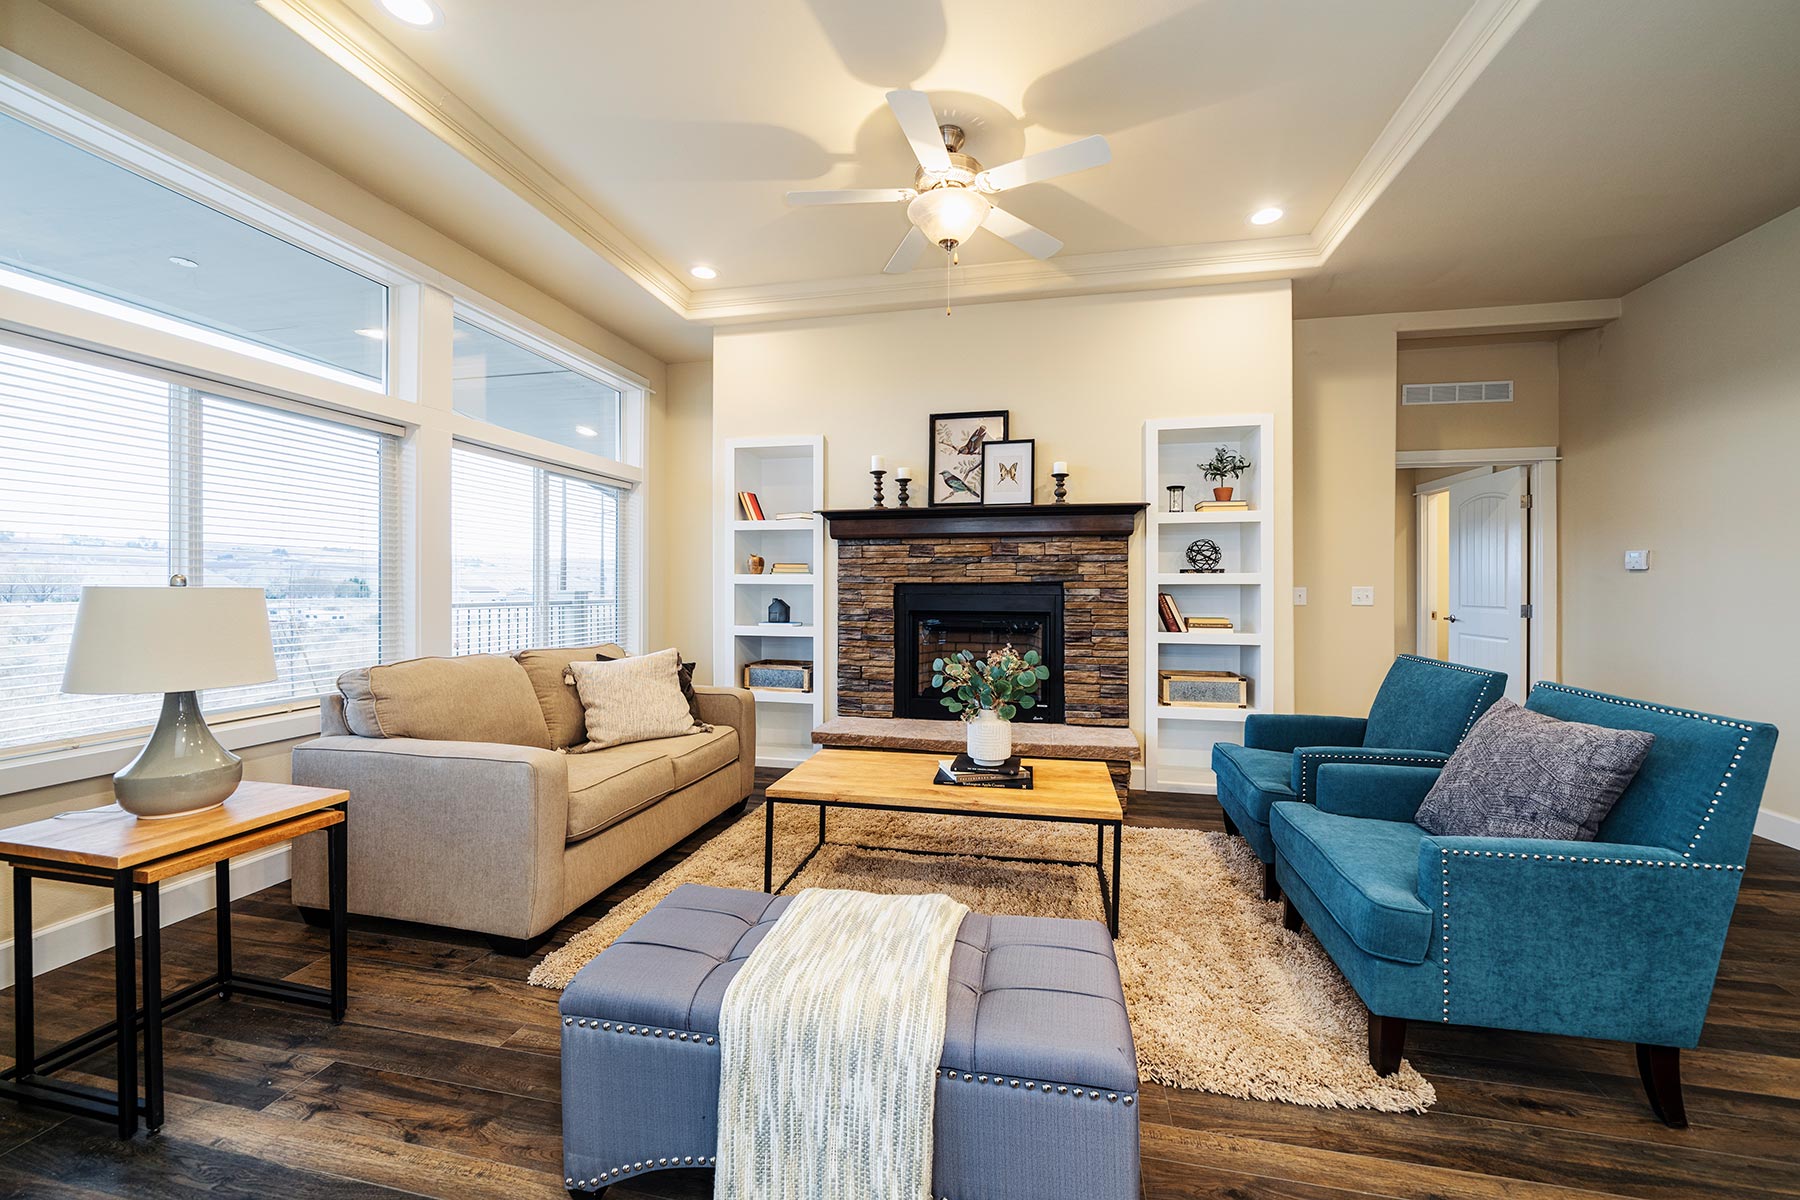 Skyline Homes Westridge 1492CT Manufactured Home Living room featuring fireplace, built-in shelving, large windows, ceiling fan